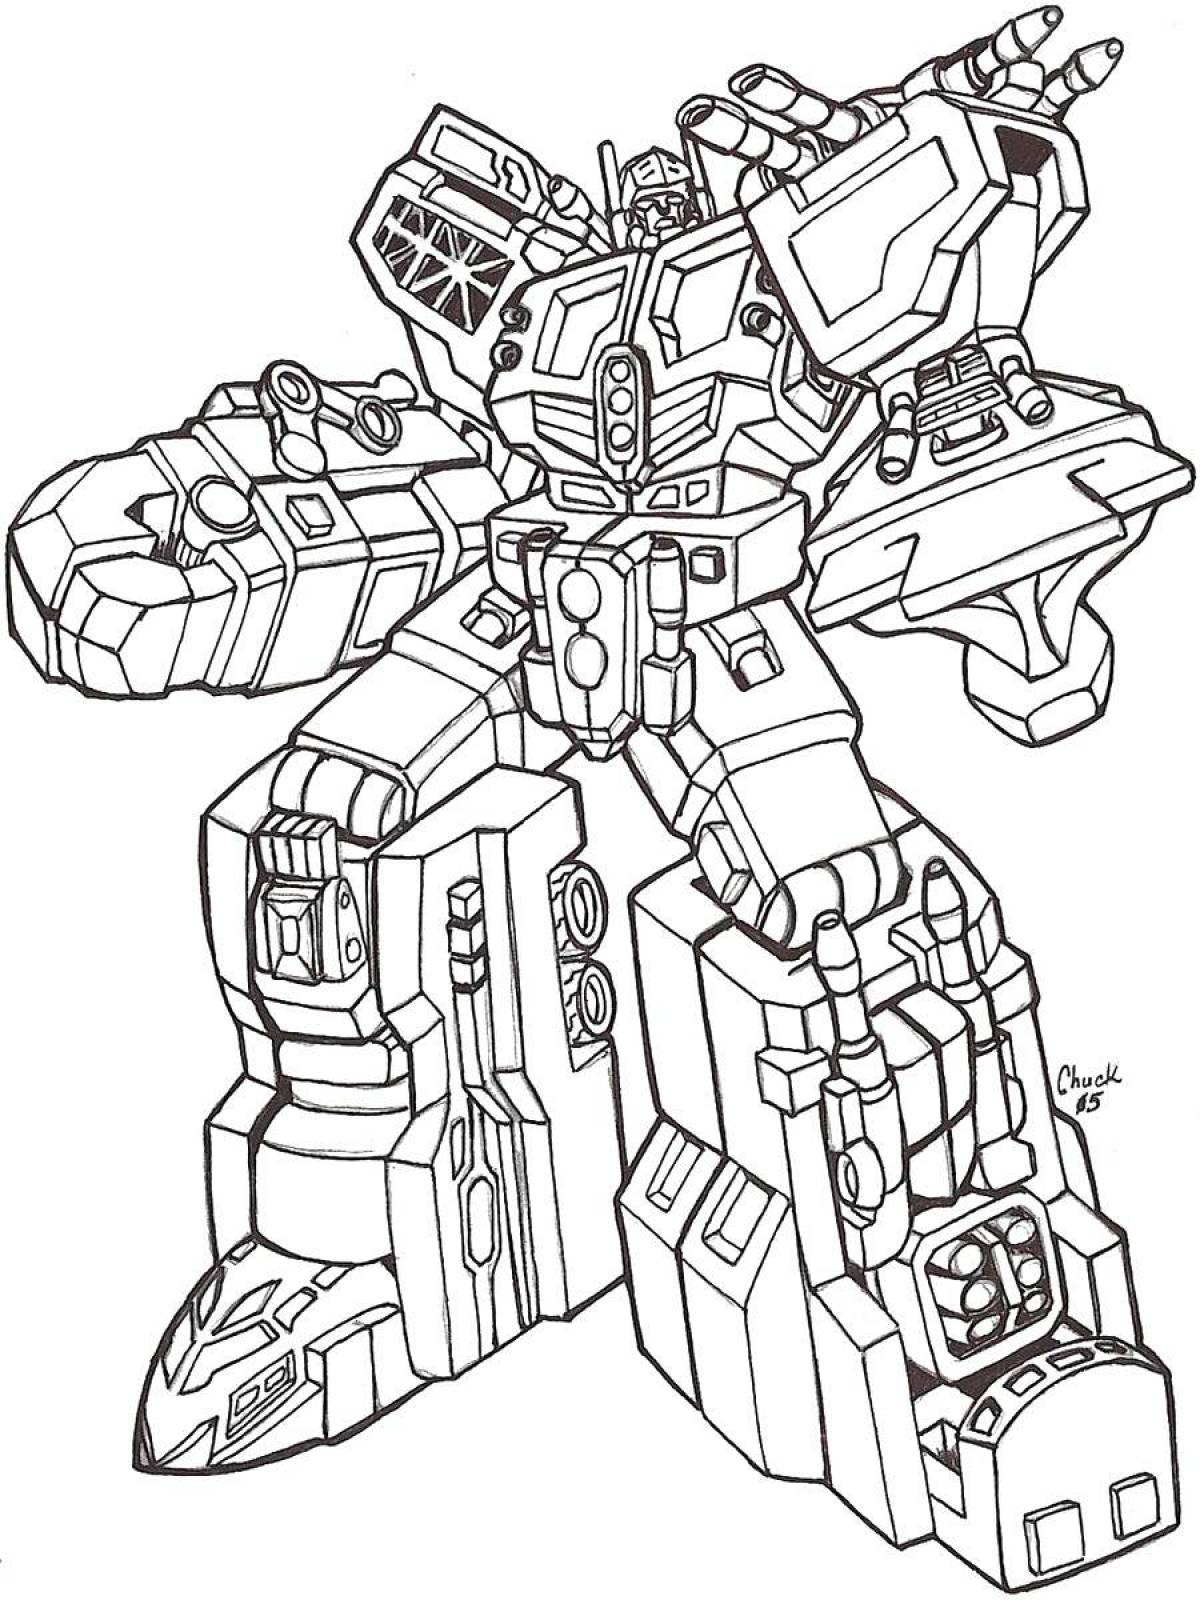 Sweet tobot coloring page